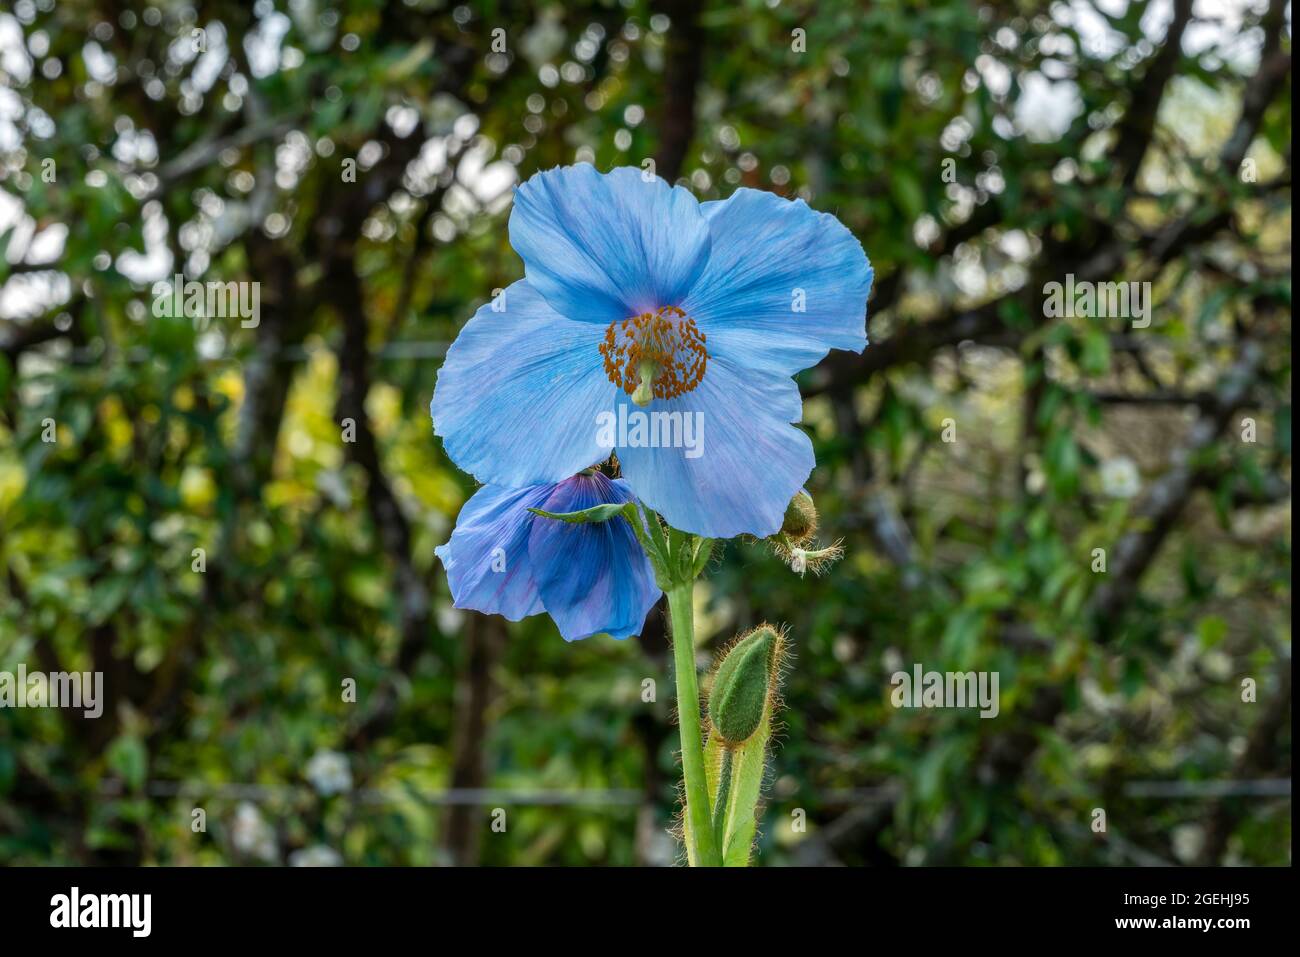 Meconopsis 'Lingholm' (Fertile Blue Group) a spring summer flowering plant with a blue summertime flower commonly known as Himalayan blue poppy, stock Stock Photo